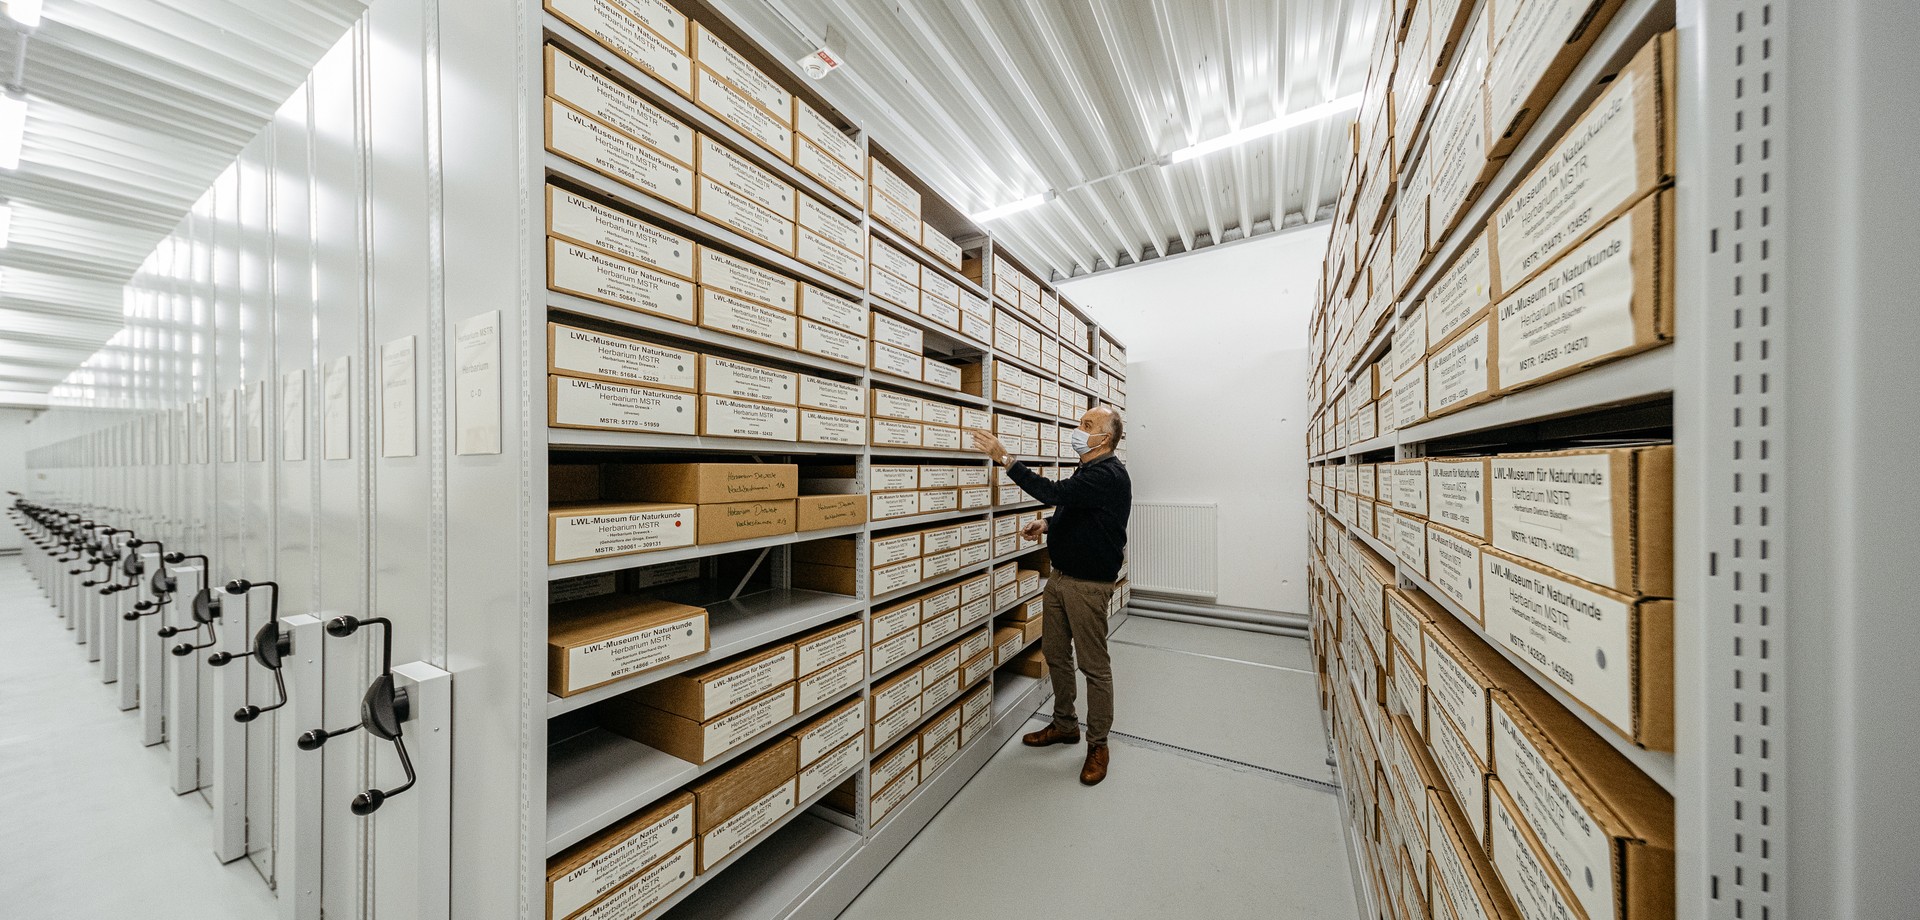 The herbarium on the large Compactus shelves in the central store of the the LWL-Museum of Natural History.